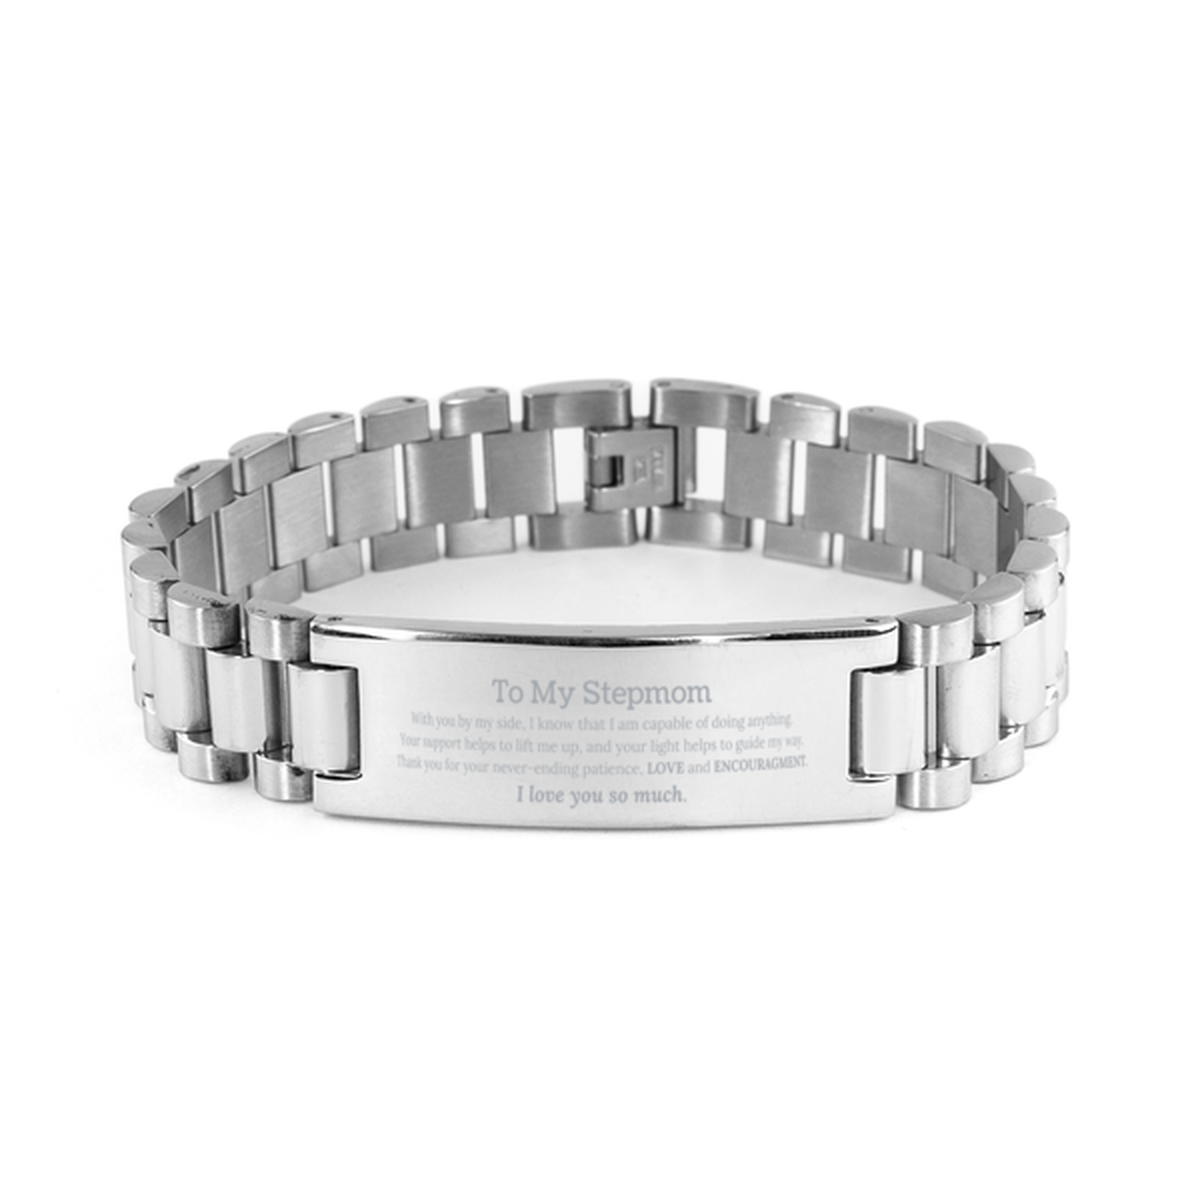 Appreciation Stepmom Ladder Stainless Steel Bracelet Gifts, To My Stepmom Birthday Christmas Wedding Keepsake Gifts for Stepmom With you by my side, I know that I am capable of doing anything. I love you so much